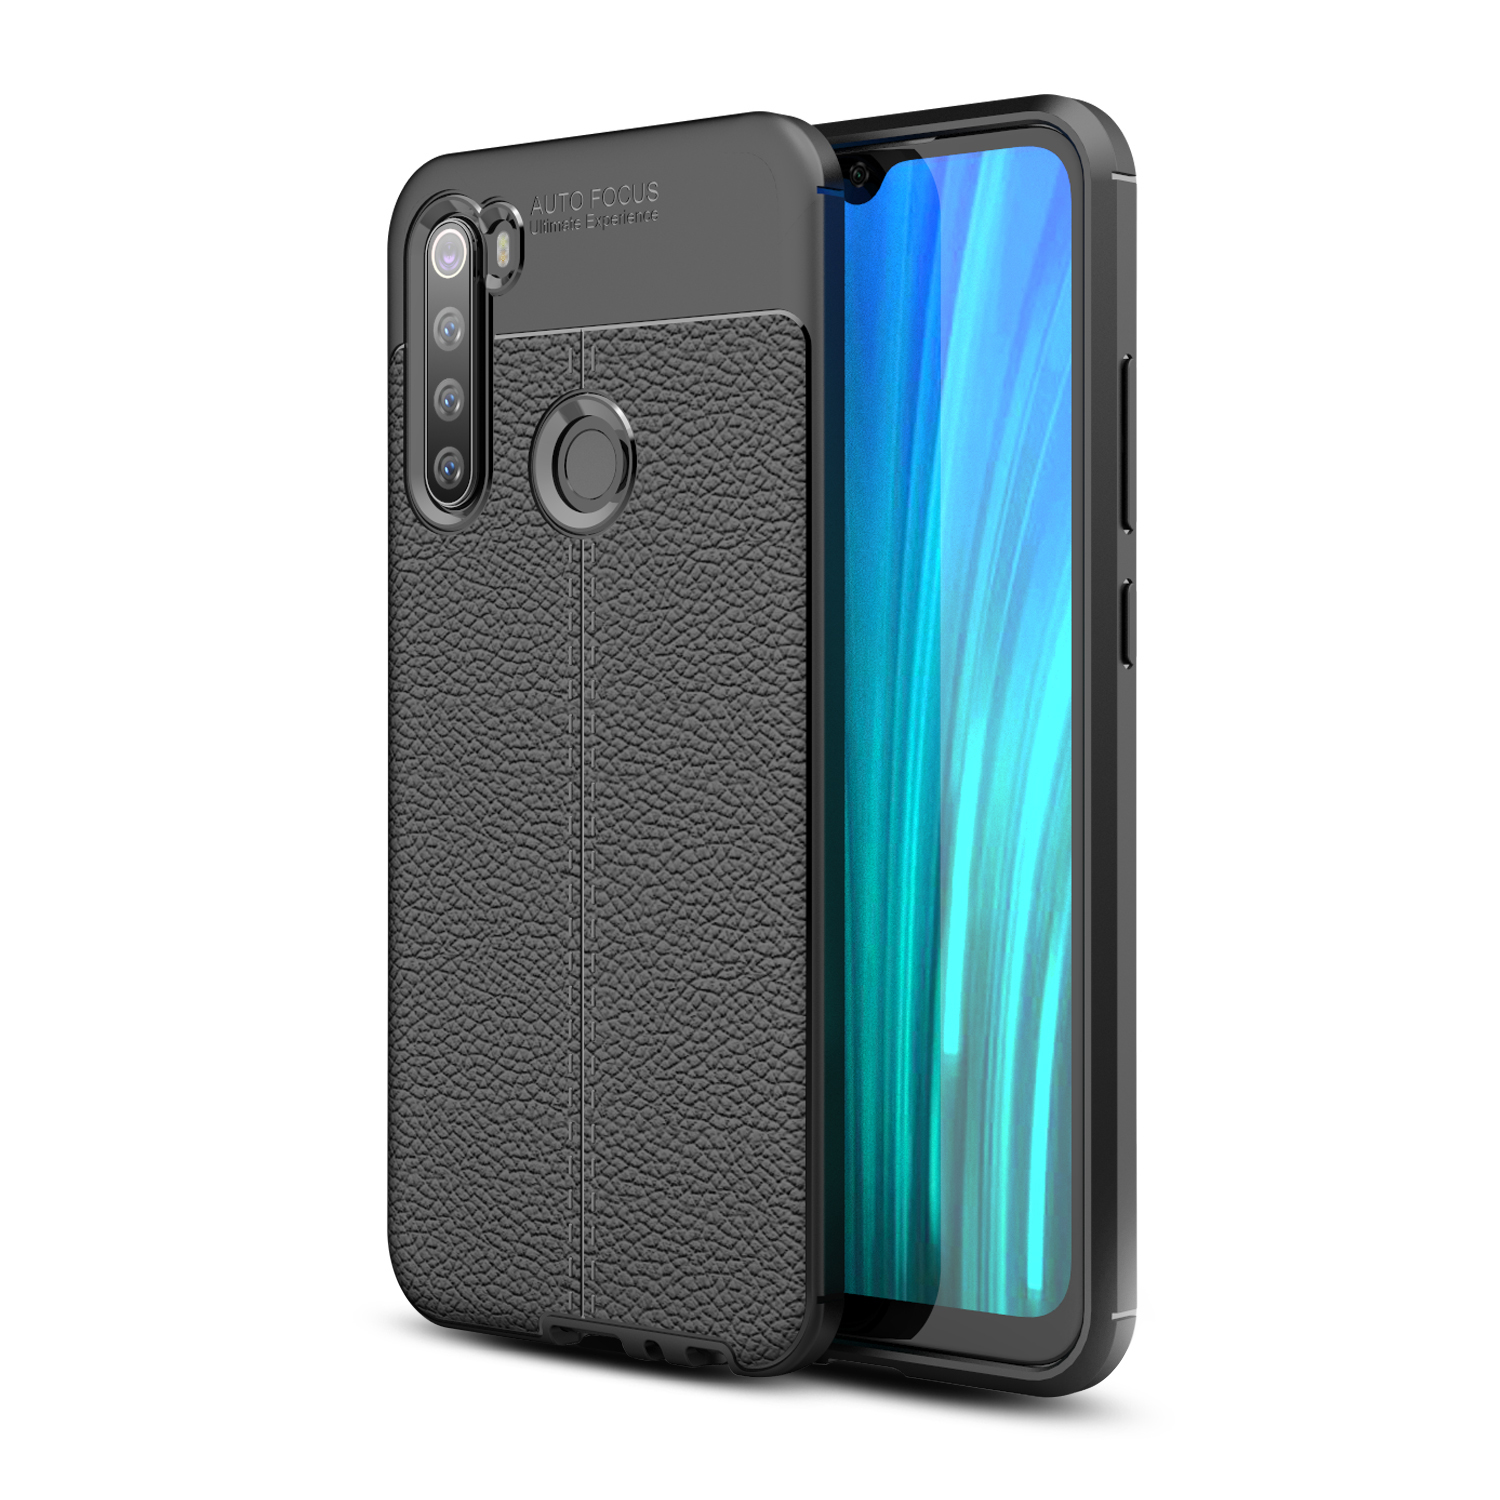 

Bakeey Luxury Litchi Pattern Shockproof PU Leather Protective Case for Xiaomi Redmi Note 8 Non-original